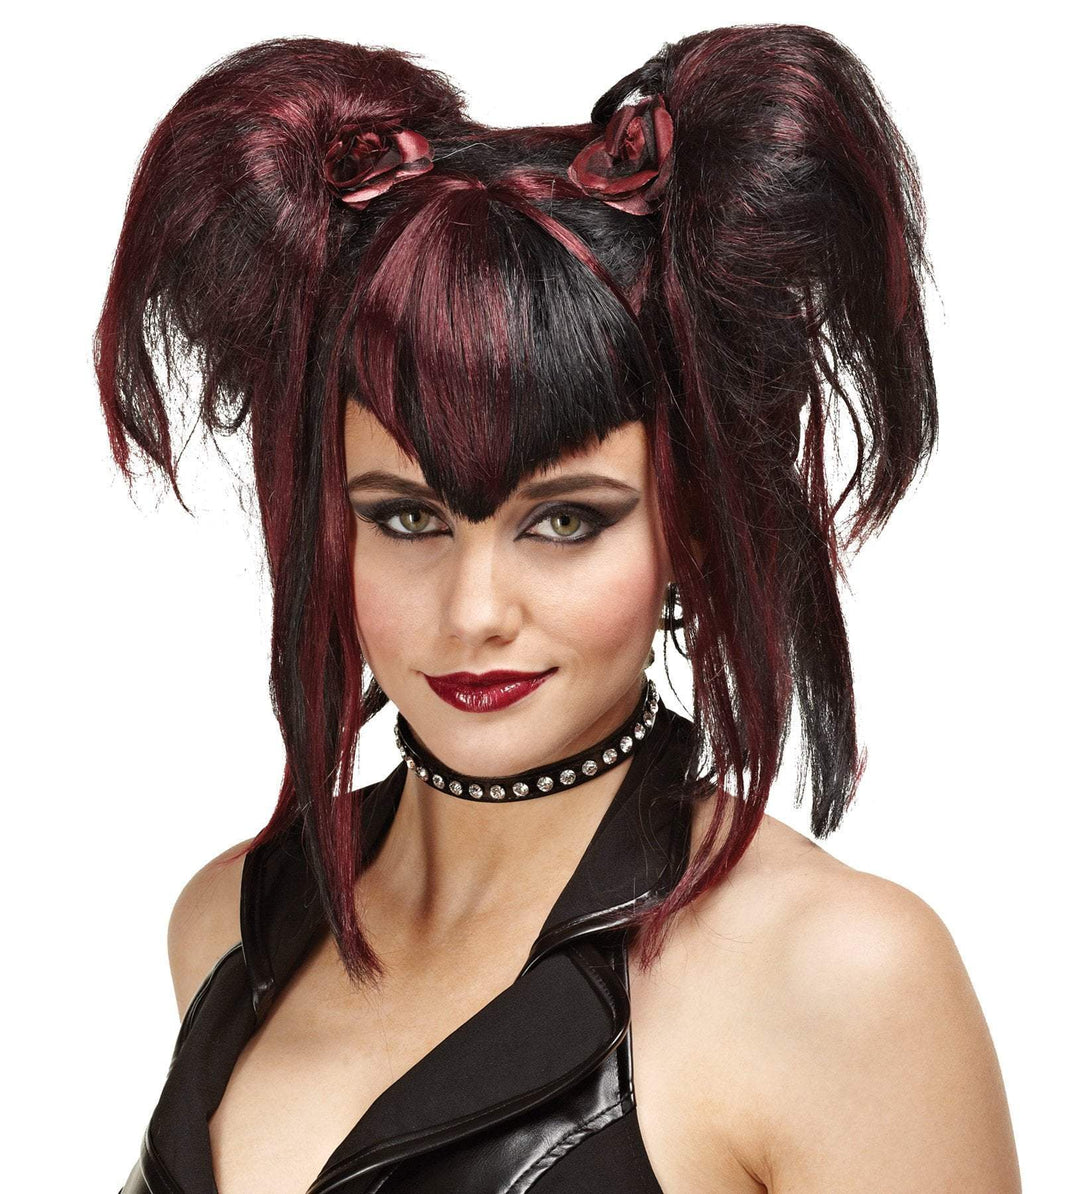 "Bad Fairy - Black and Red" Halloween Wig